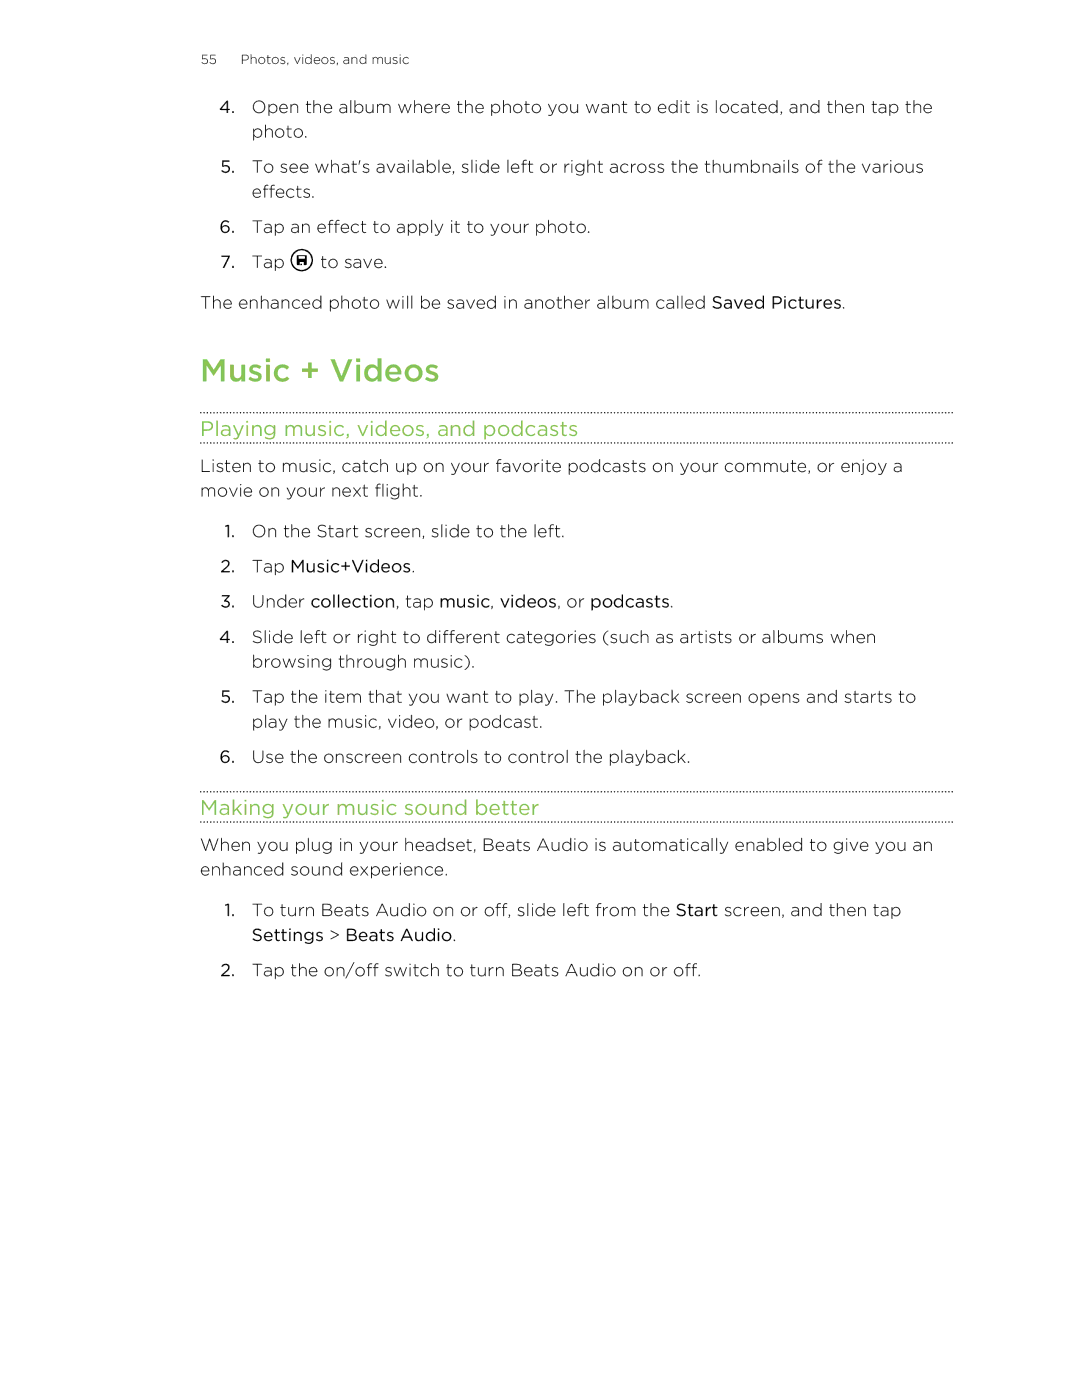 HTC 8X manual Music + Videos, Playing music, videos, and podcasts, Making your music sound better 